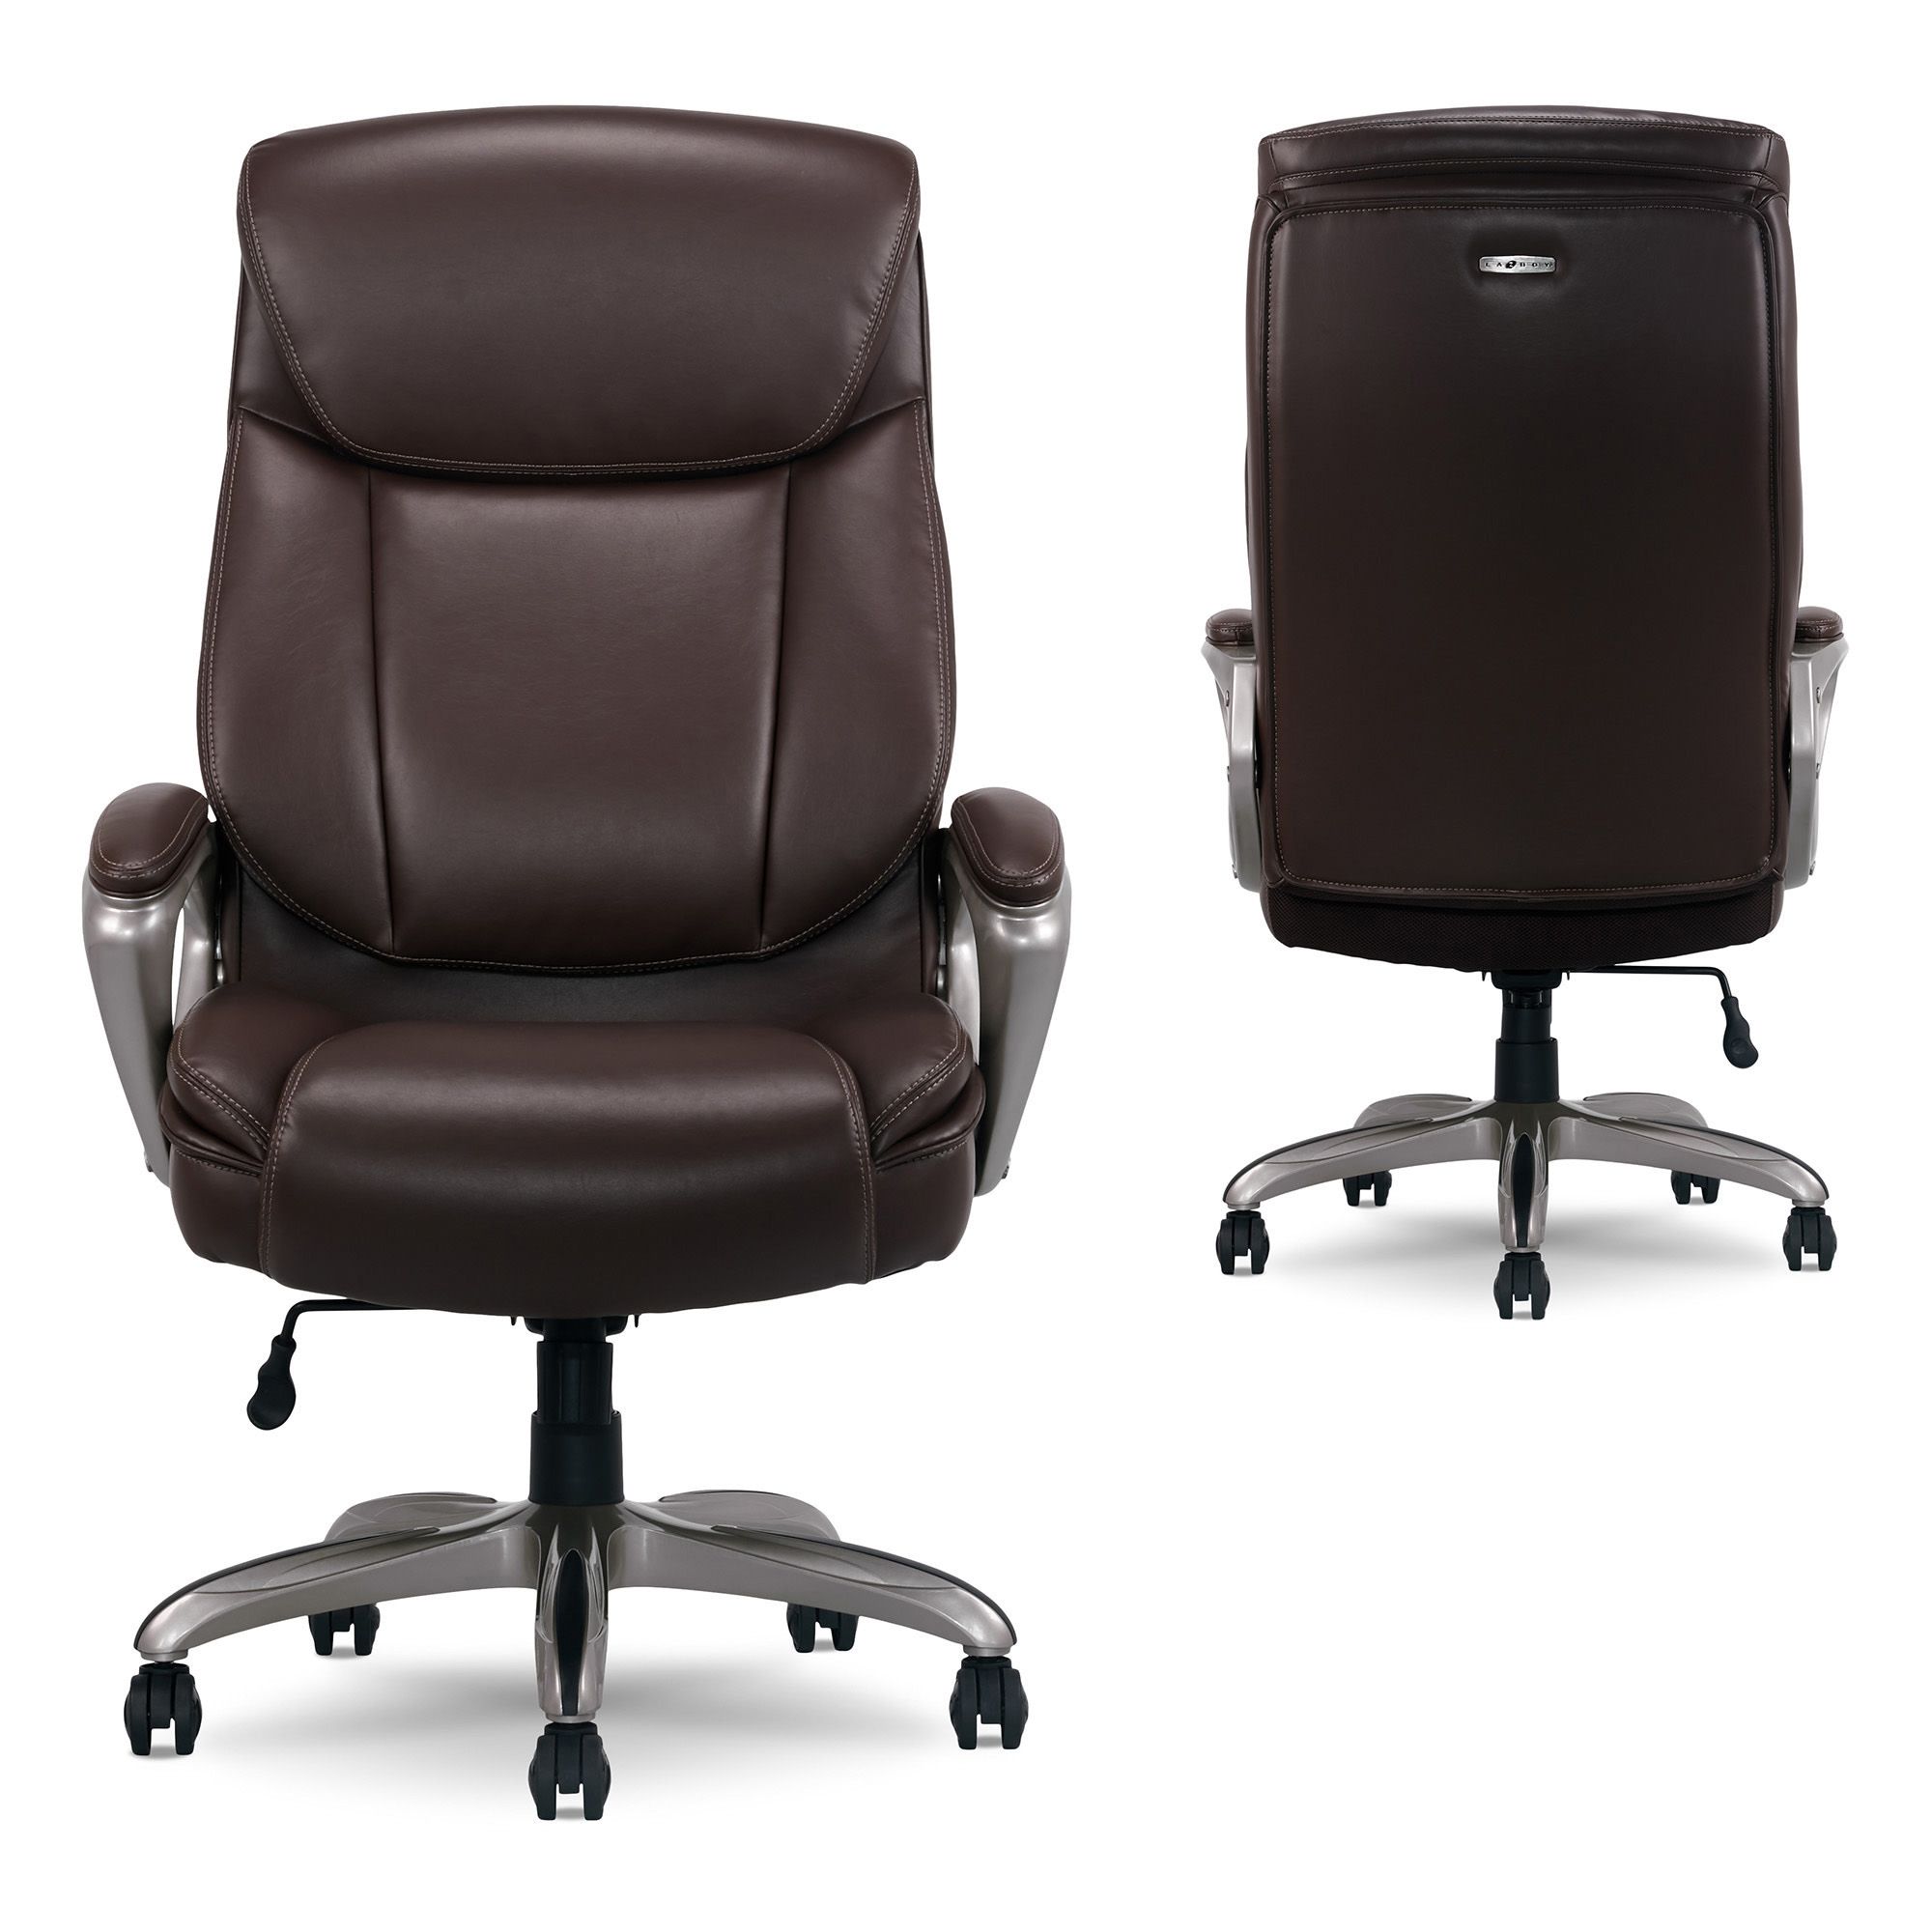 La-Z-Boy Big and Tall Bonded Leather Executive Chair -Brown